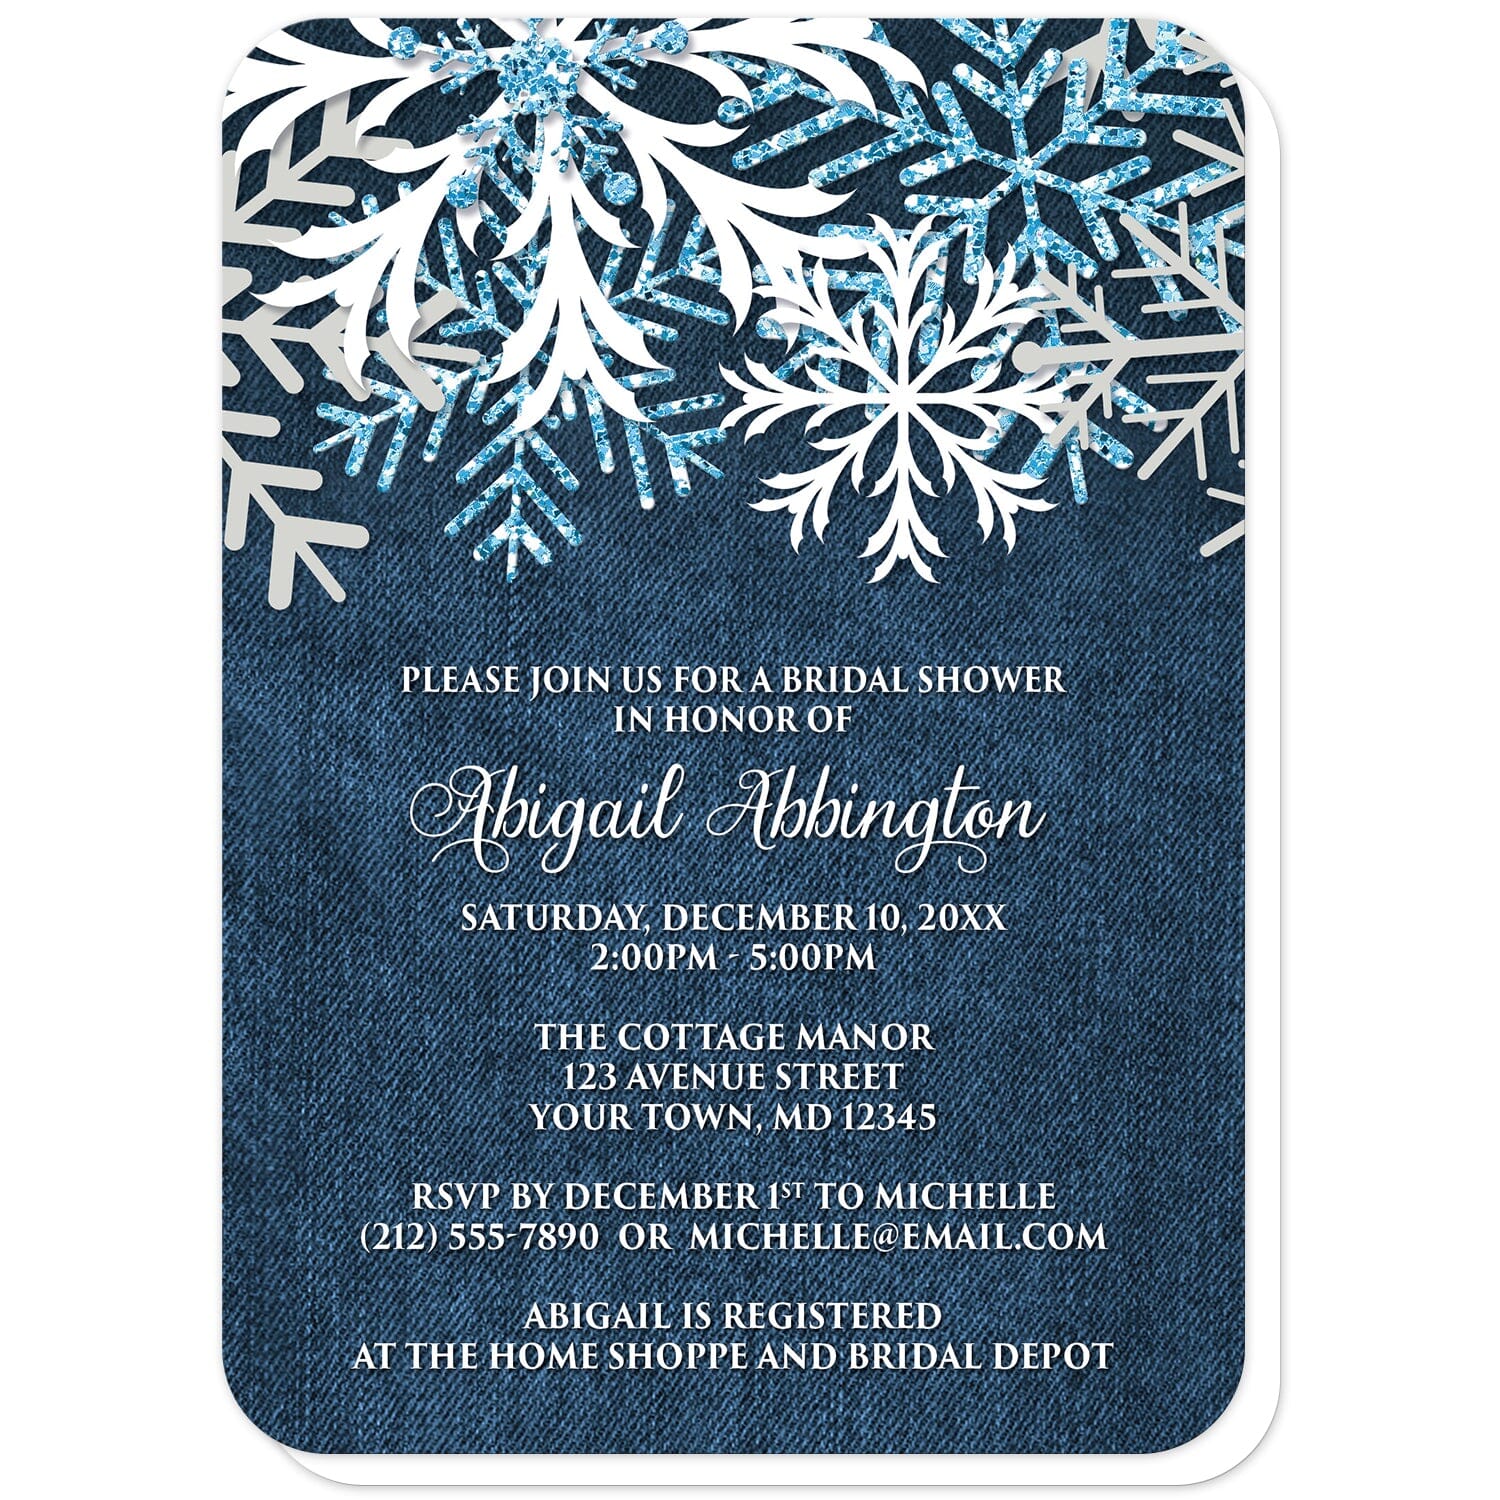 Rustic Snowflake Denim Winter Bridal Shower Invitations (with rounded corners) at Artistically Invited. Rustic snowflake denim winter bridal shower invitations with white, aqua blue glitter-illustrated, and light gray snowflakes along the top over a navy blue denim design. Your personalized bridal shower celebration details are custom printed in white over the blue denim background below the pretty snowflakes.